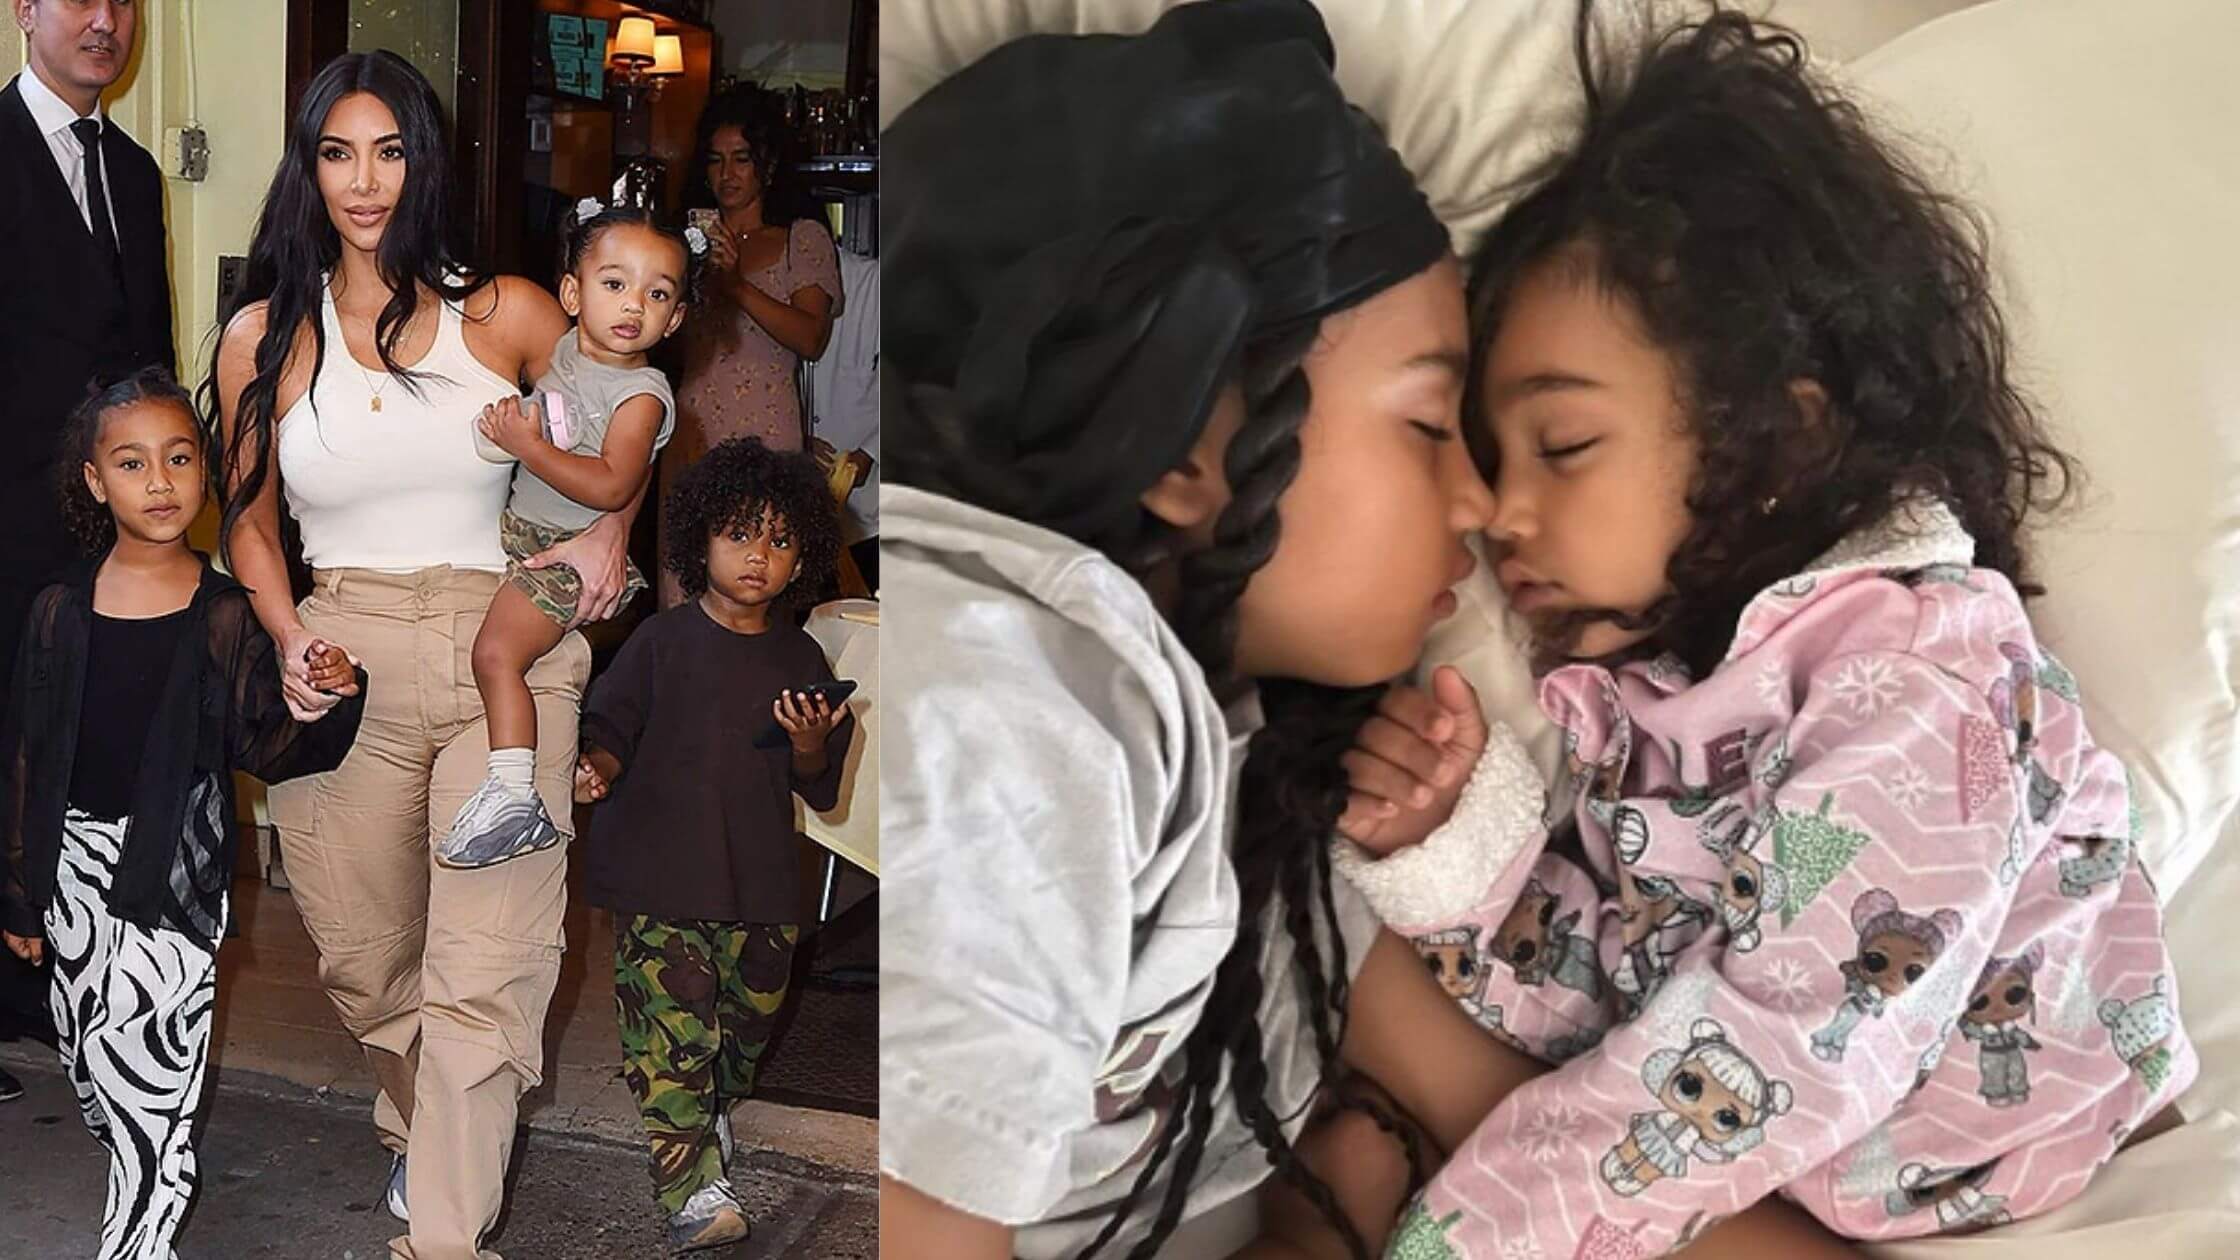 North, 9, and Chicago, 4, are Kim Kardashian's Children In A Nose-to-Nose Sleep Position